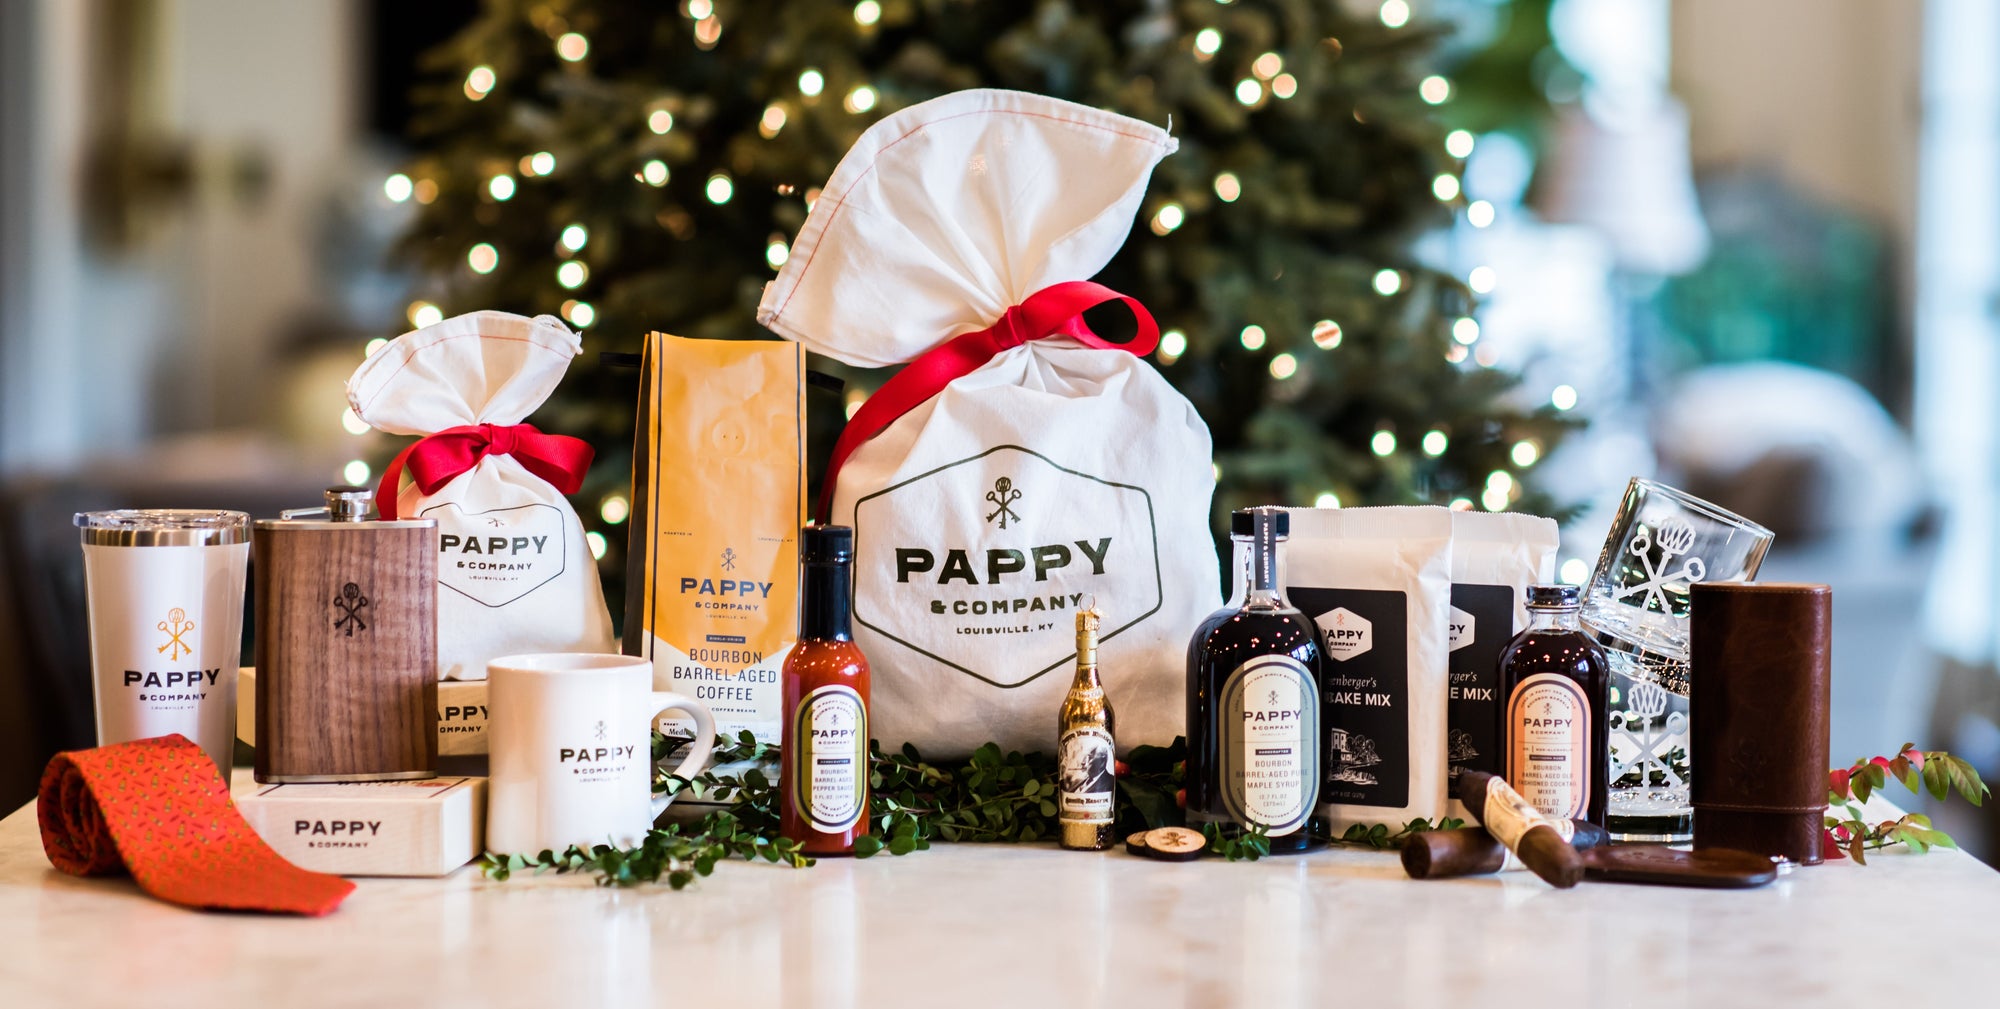 Pappy Holiday Gifts